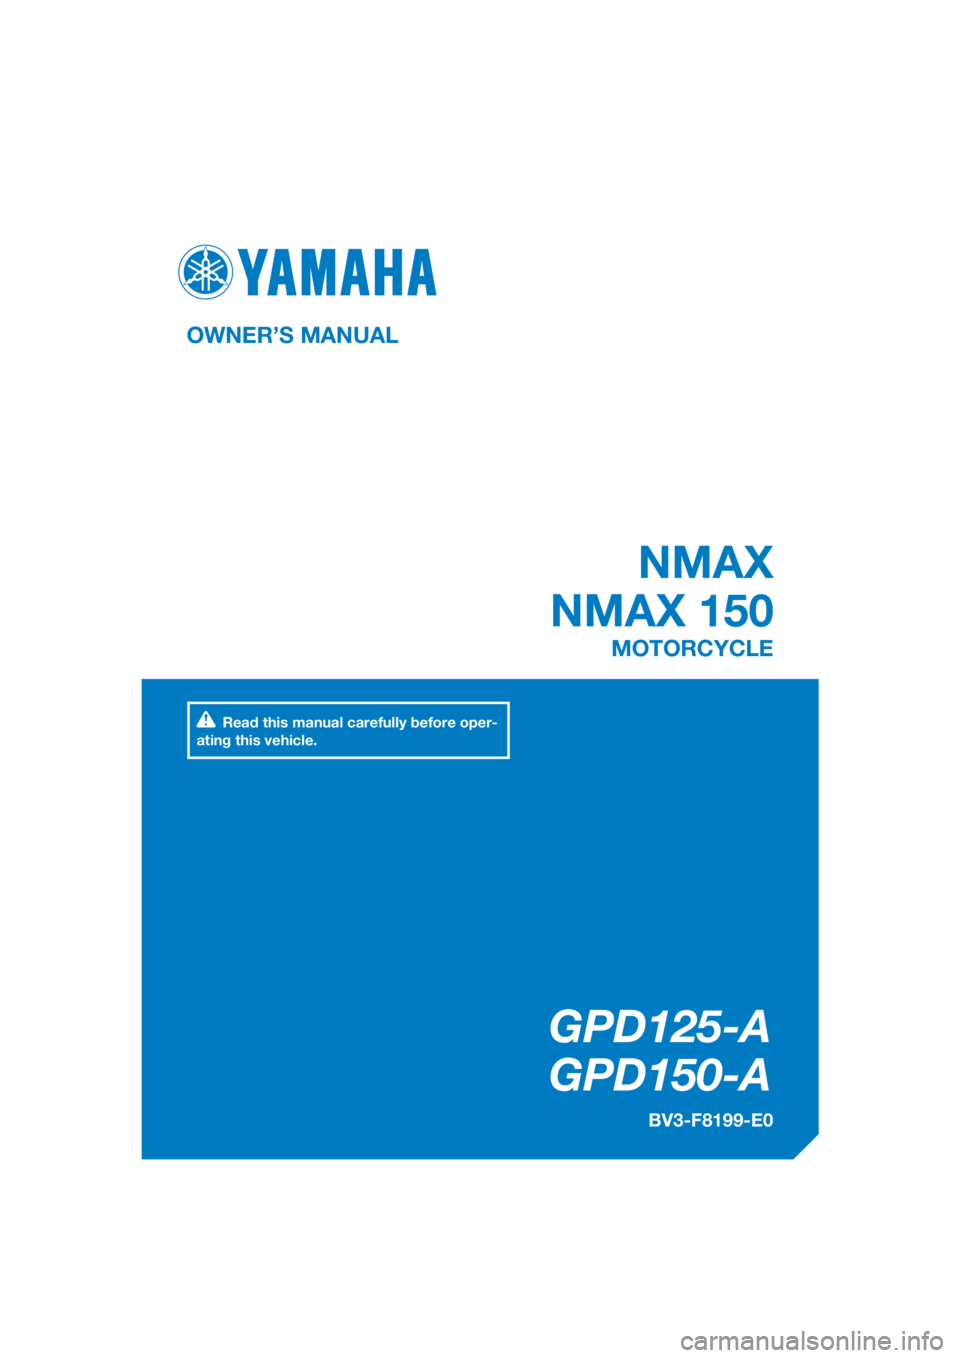 YAMAHA NMAX 150 2017  Owners Manual DIC183
GPD125-A
   GPD150-A
OWNER’S MANUAL
BV3-F8199-E0
MOTORCYCLE
[English  (E)]
Read this manual carefully before oper-
ating this vehicle.
 NMAX
NMAX 150 